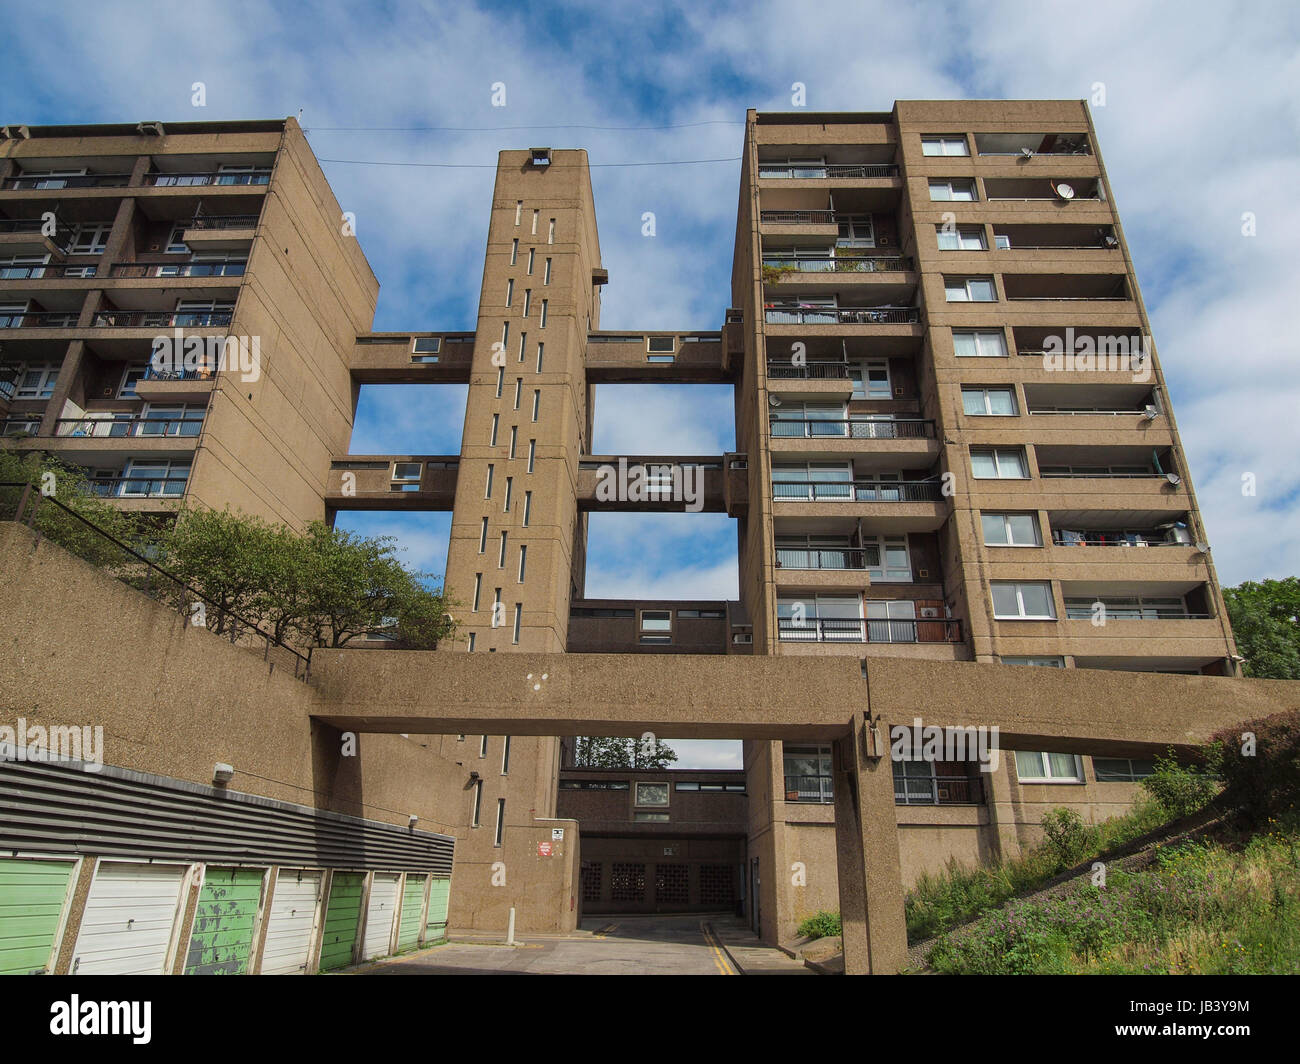 LONDON, ENGLAND, UK - JUNE 20, 2011: The Balfron Tower designed by Erno Goldfinger in 1963 is a Grade II listed masterpiece of new brutalist architecture Stock Photo